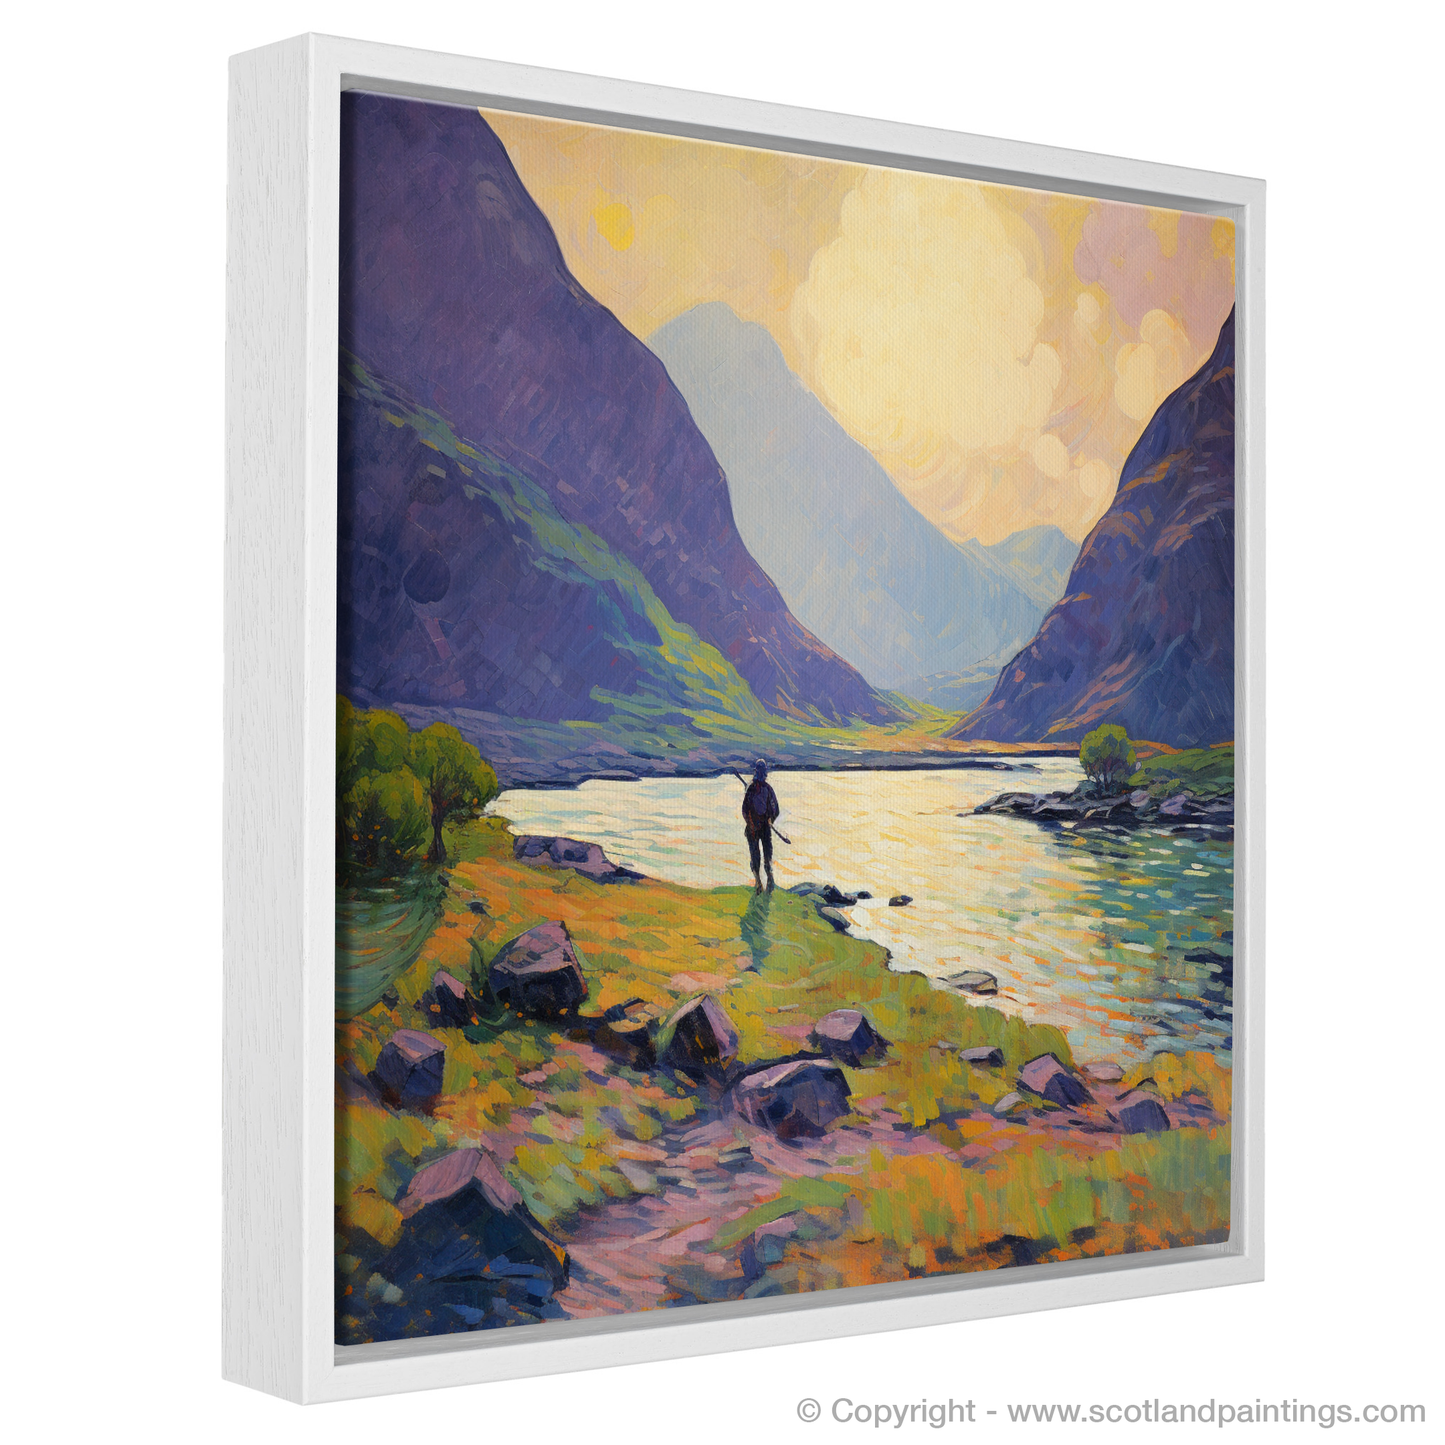 Painting and Art Print of Lone hiker in Glencoe during summer entitled "Summer Solitude: A Lone Hiker in Glencoe".